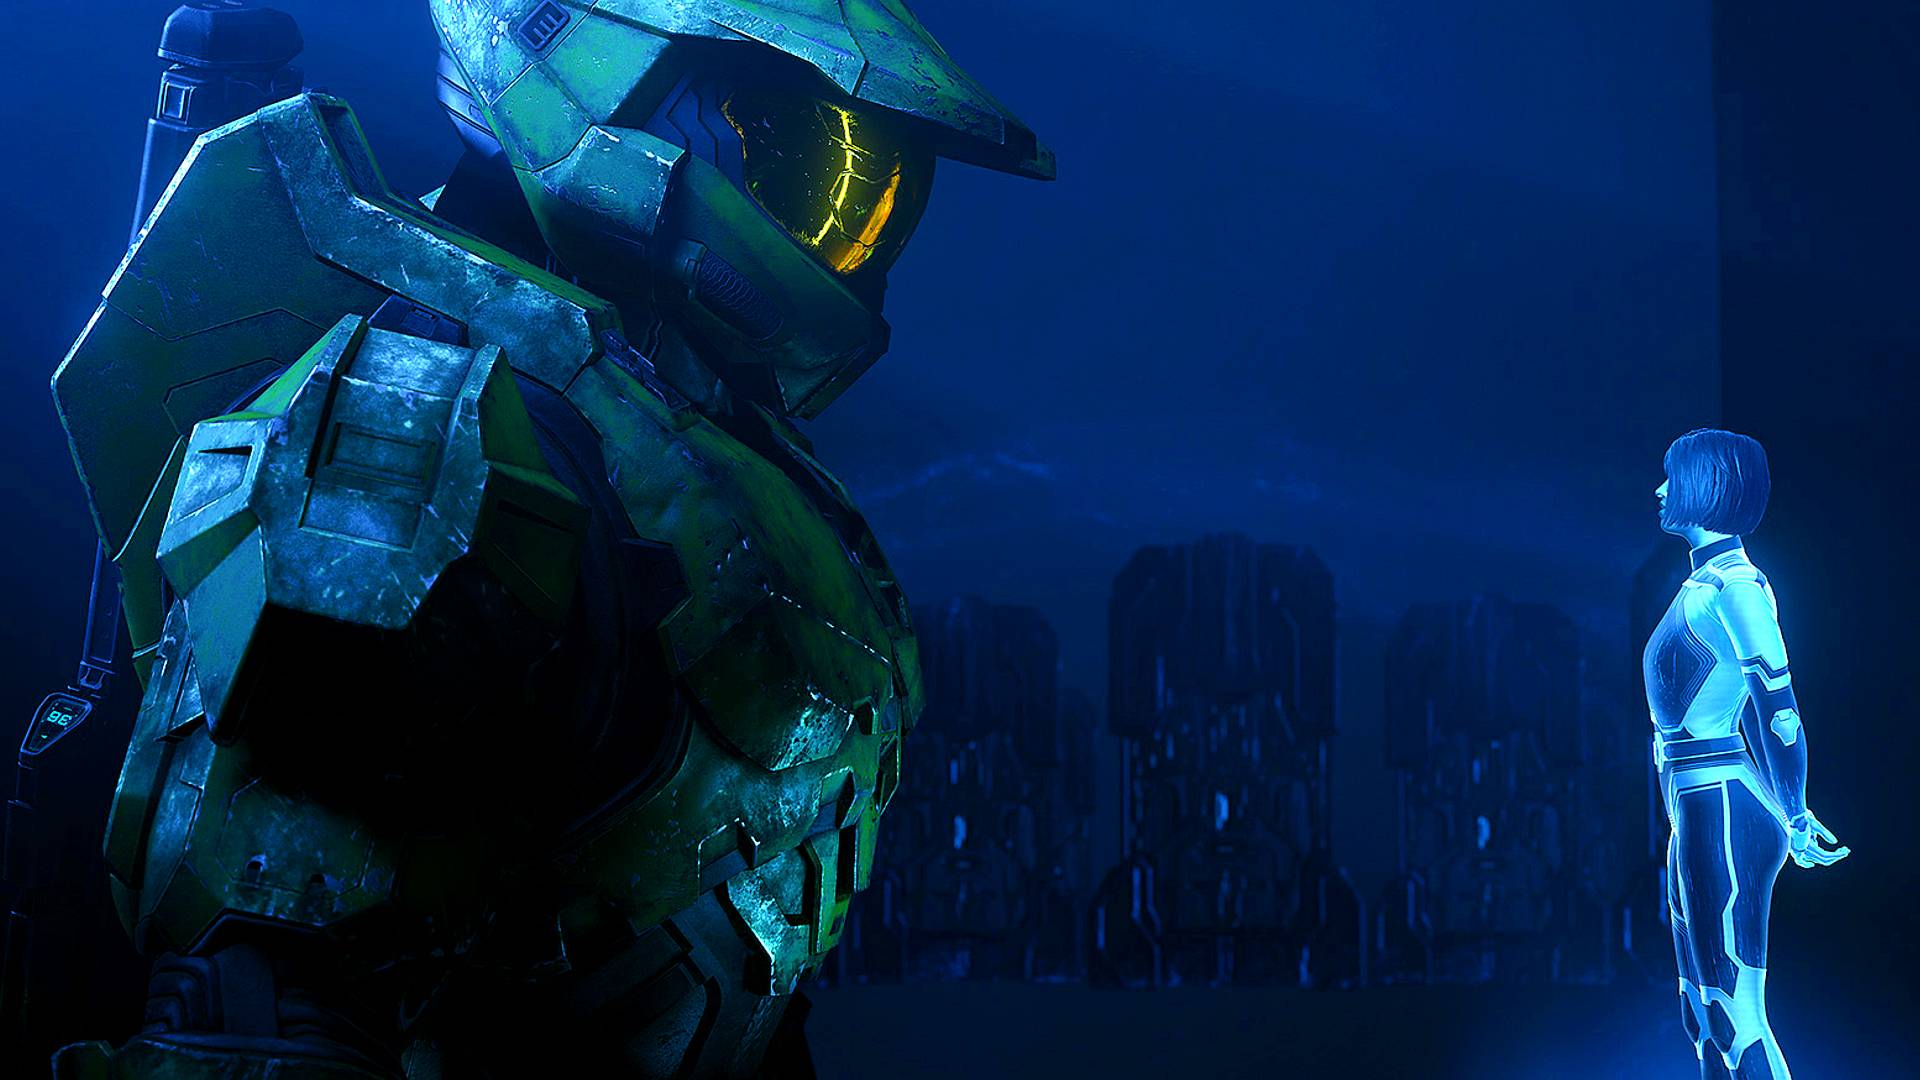 When does Halo Infinite's campaign come out? Release date, Game